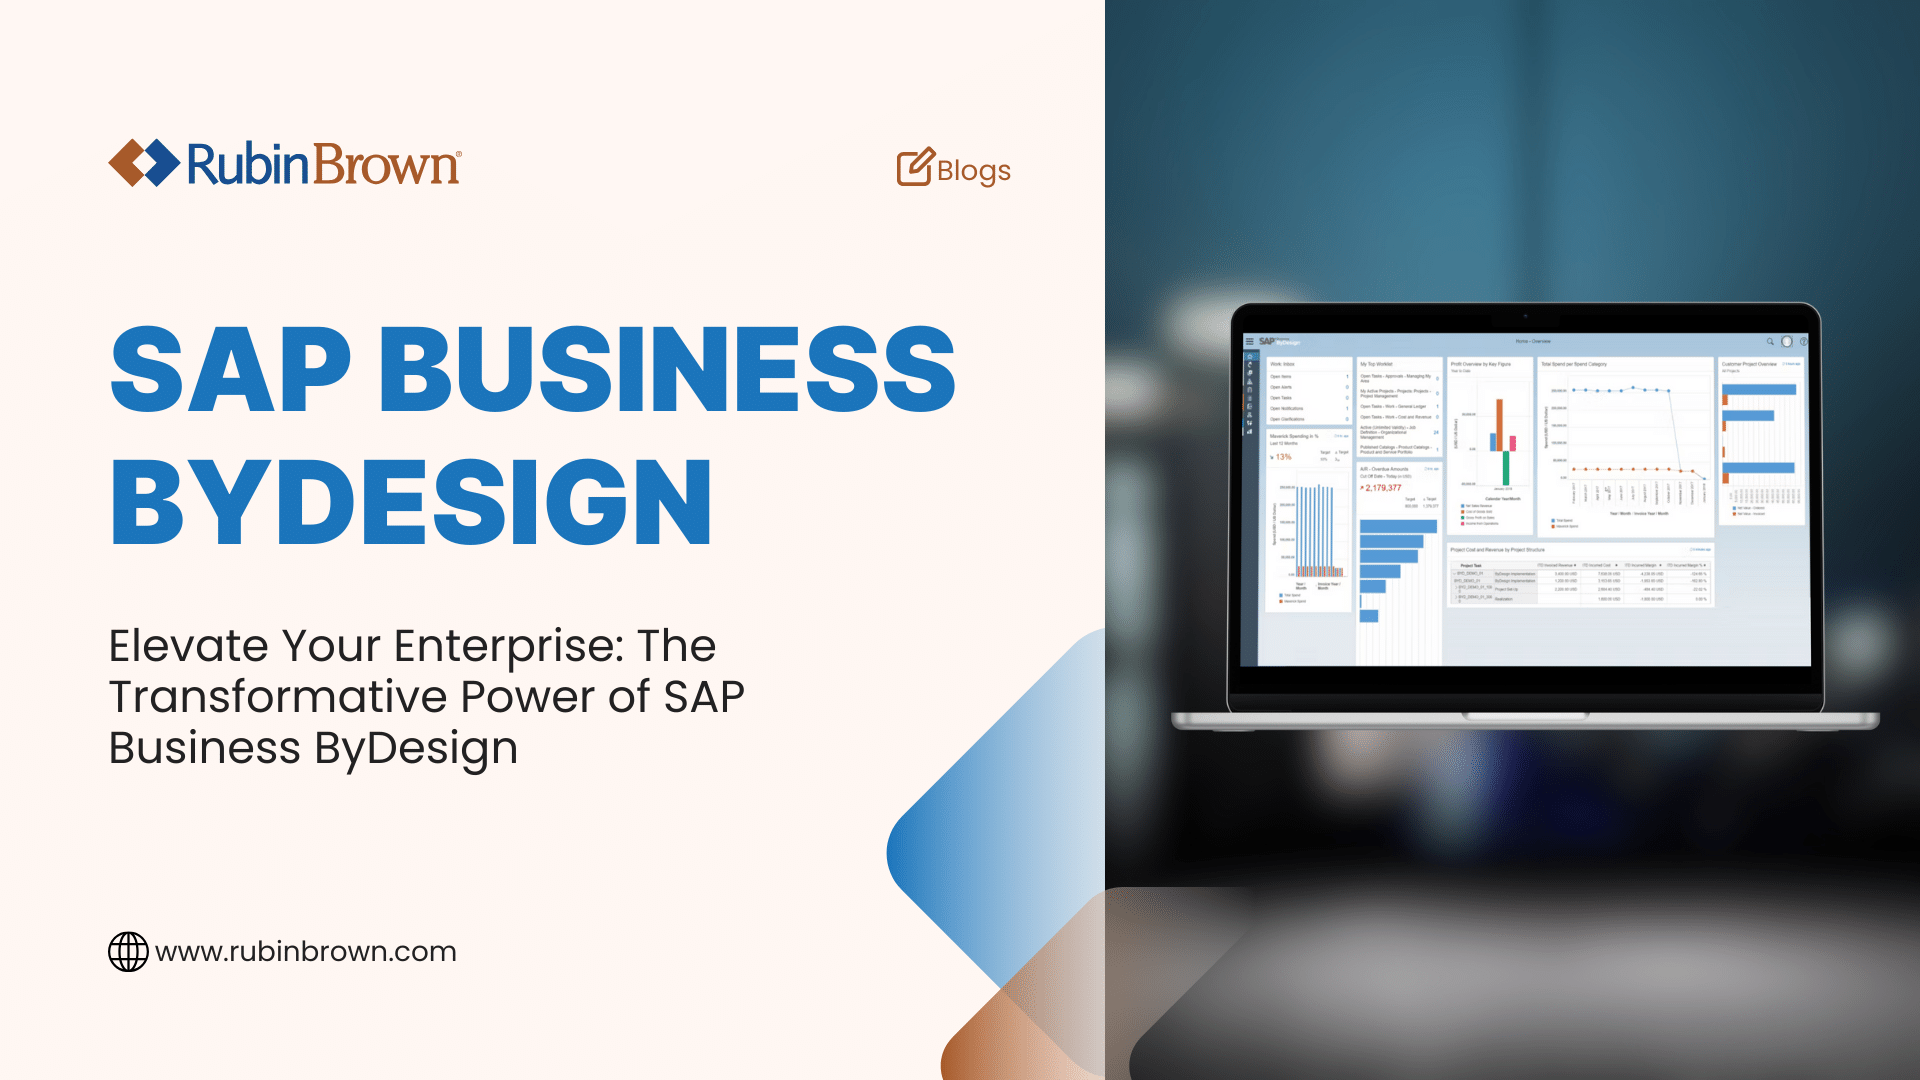 SAP Business ByDesign Overview